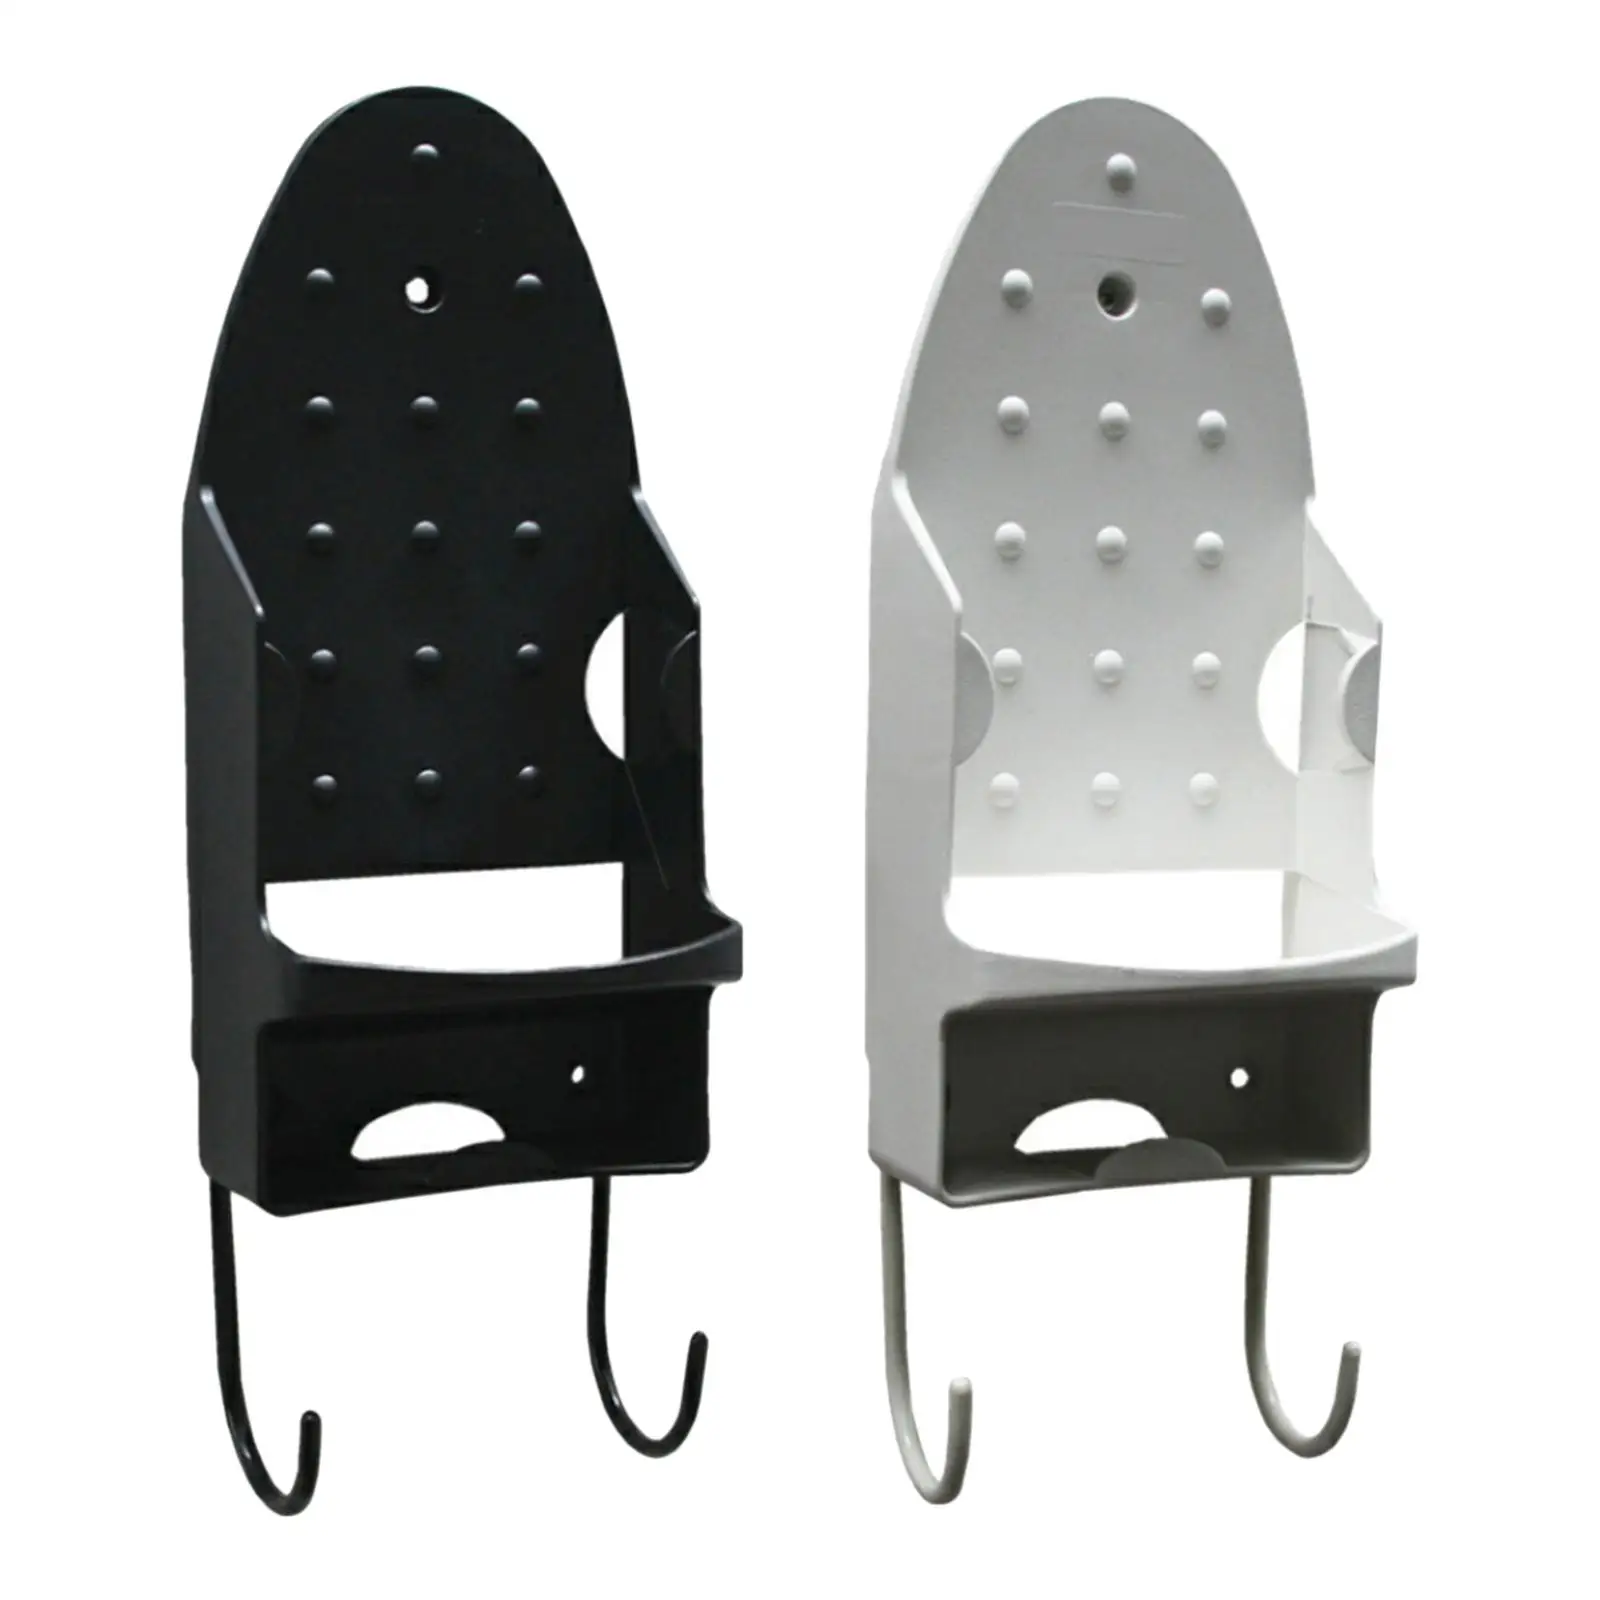 Electric Ironing Board Hanger with Hooks PBT Plastic Over The Door Ironing Board